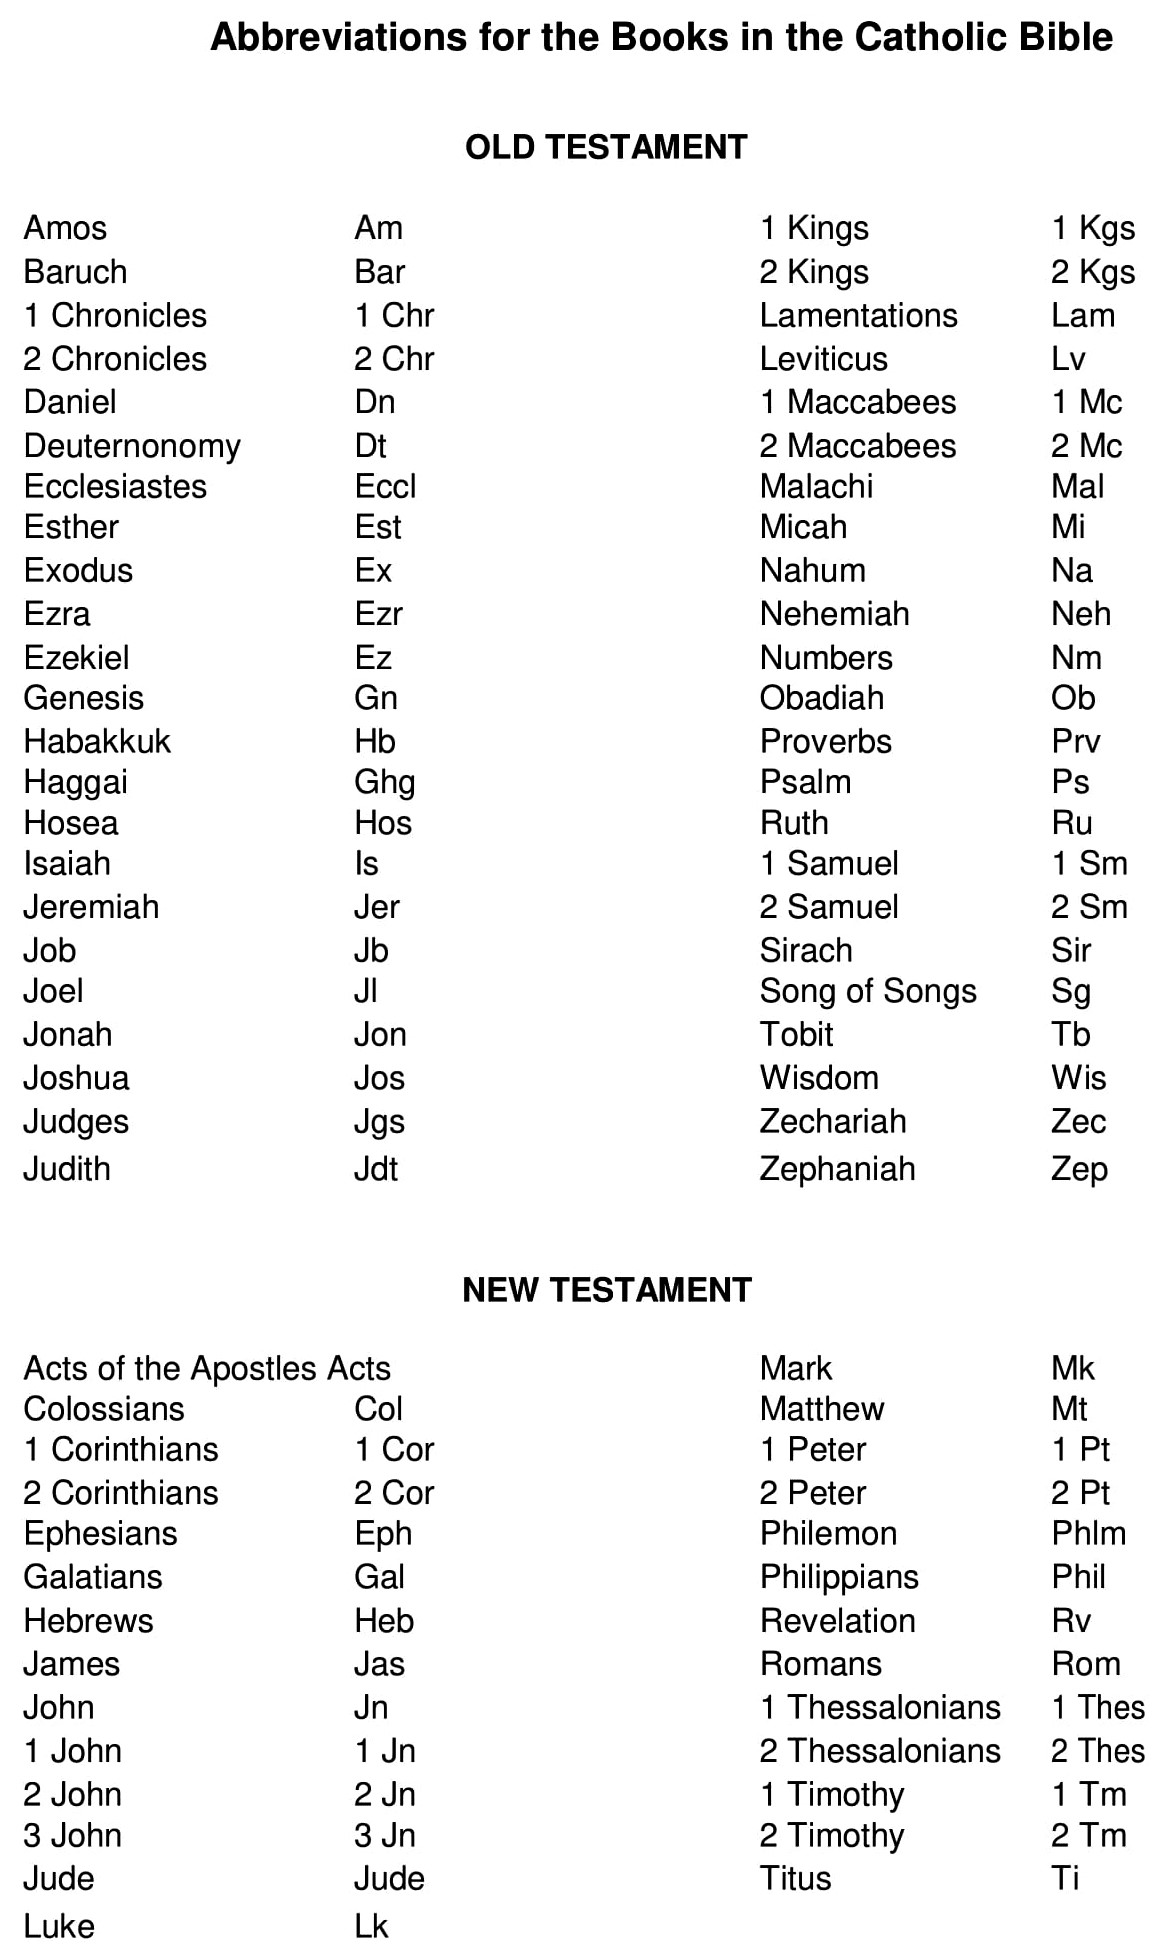 abbreviations for the books of the catholic bible